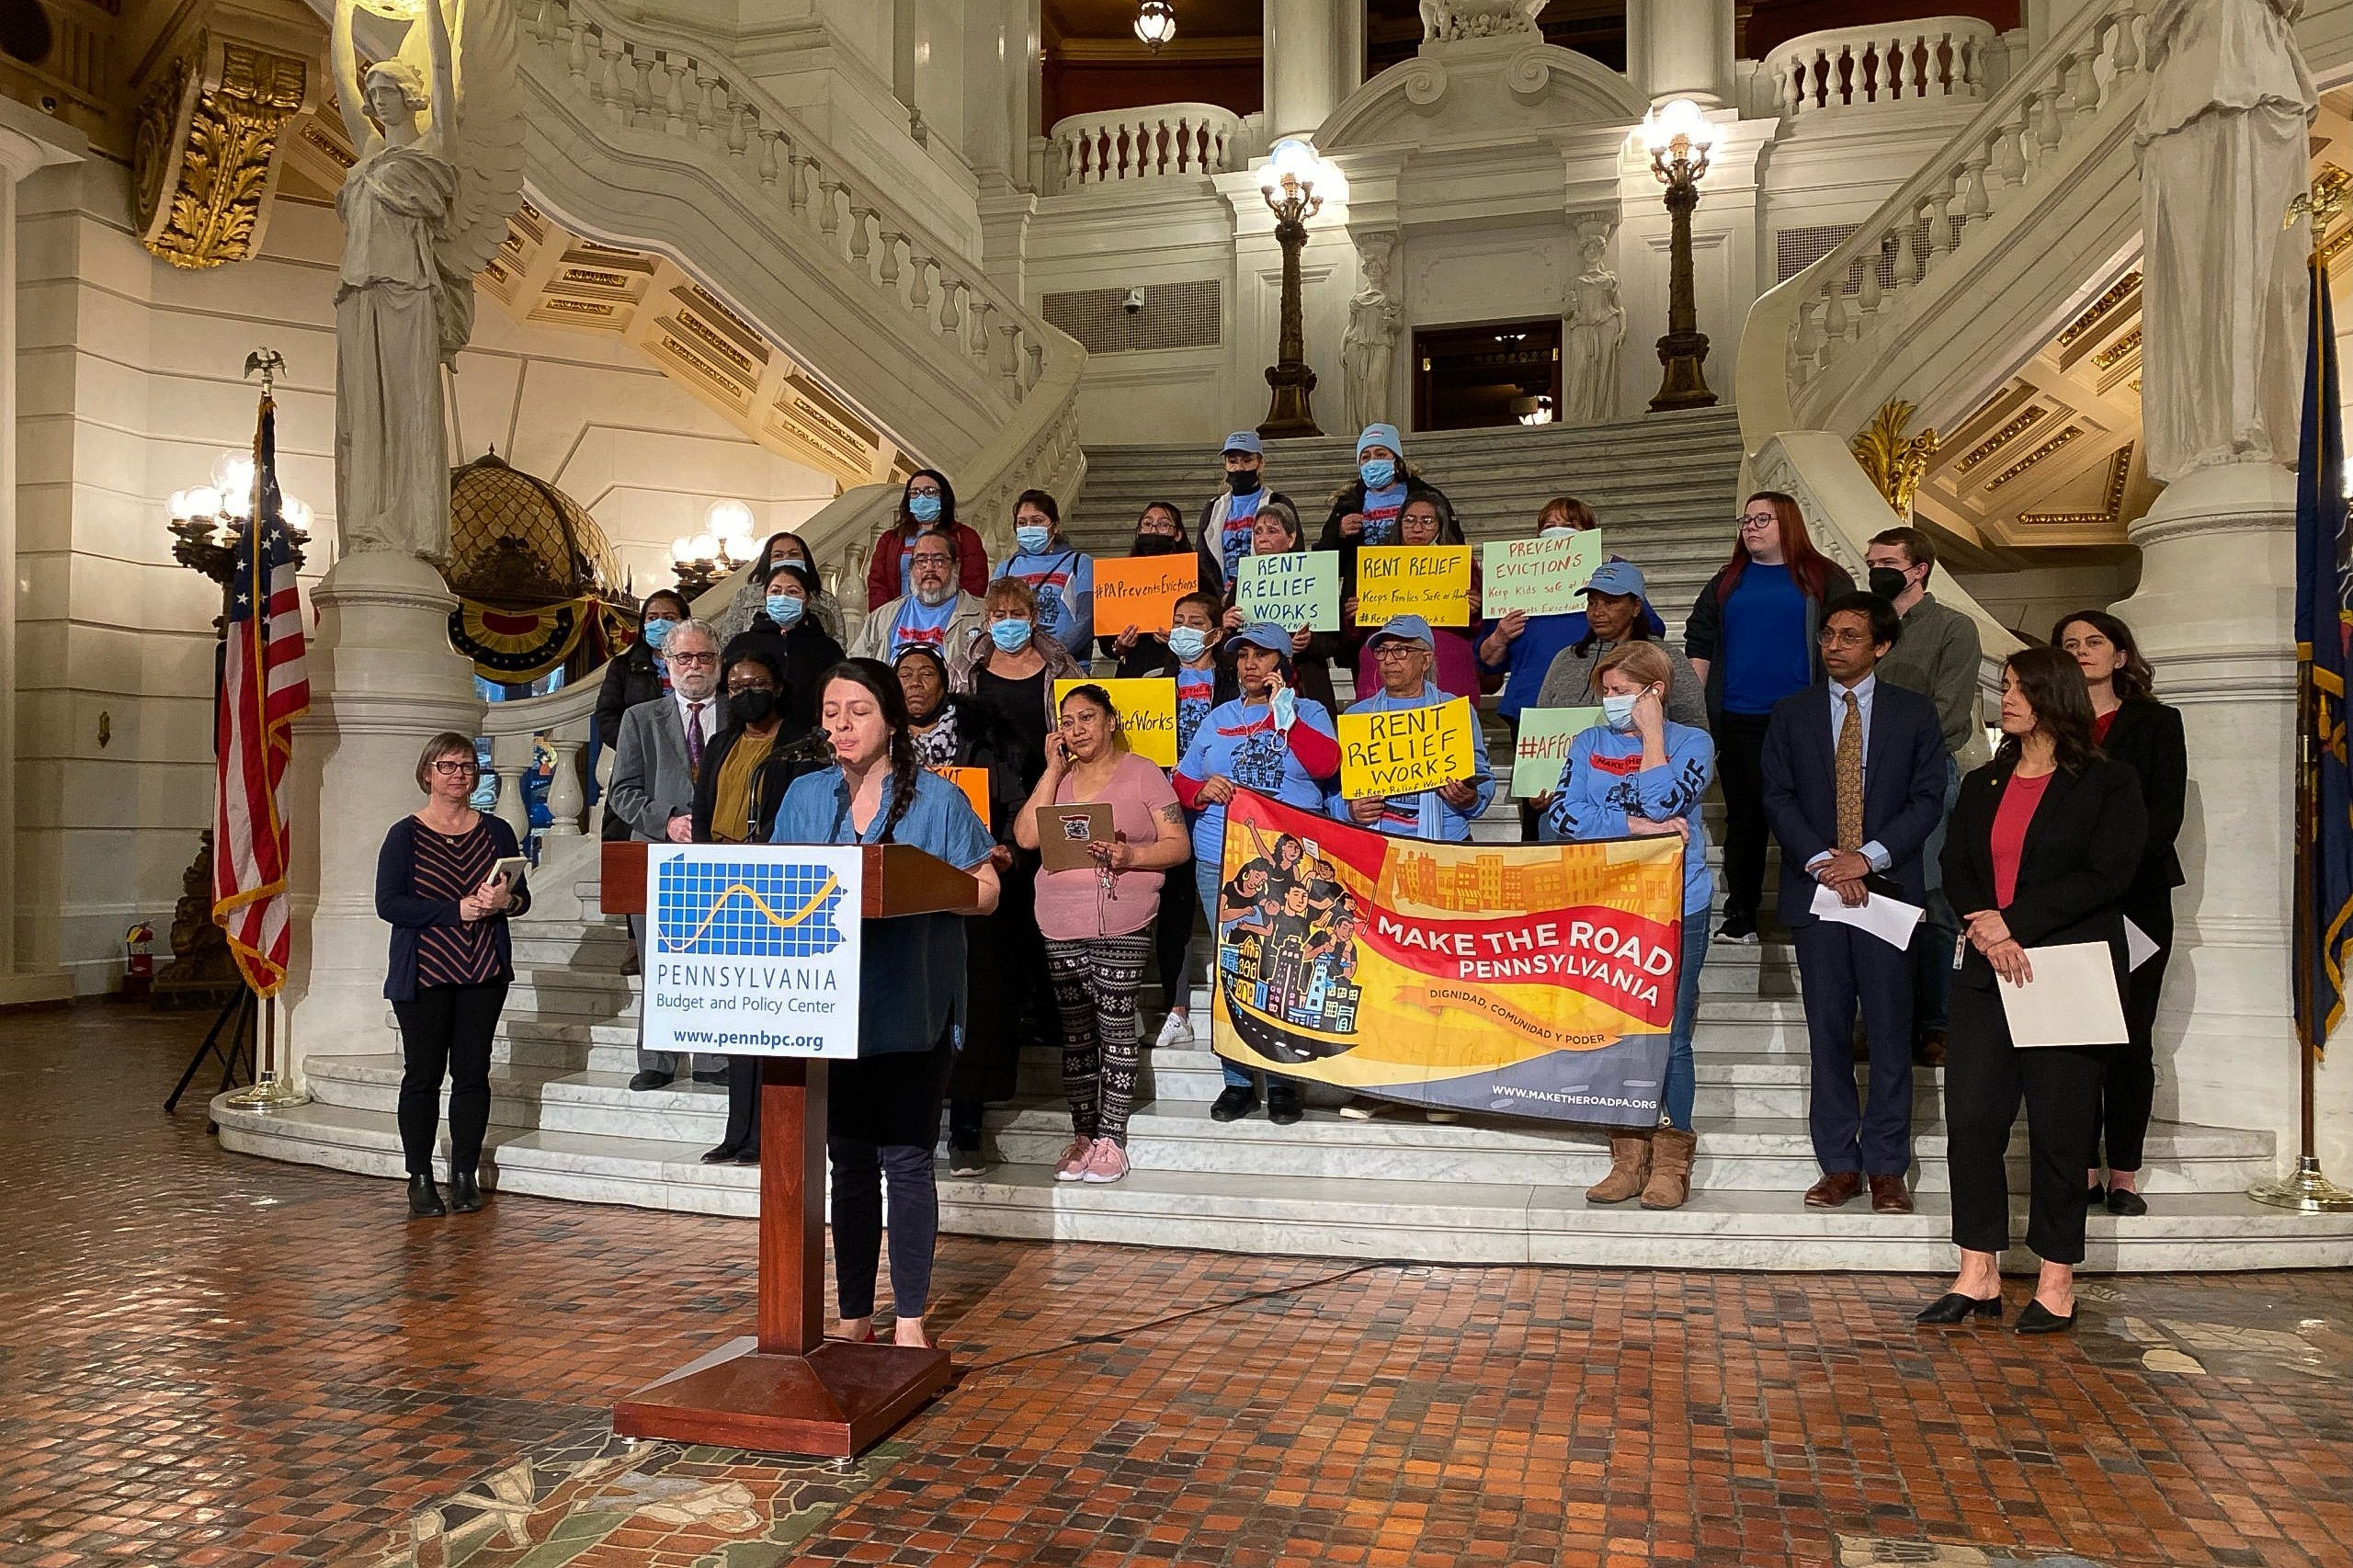 Pennsylvania needs rental assistance and eviction diversion programs, activists and lawmakers say